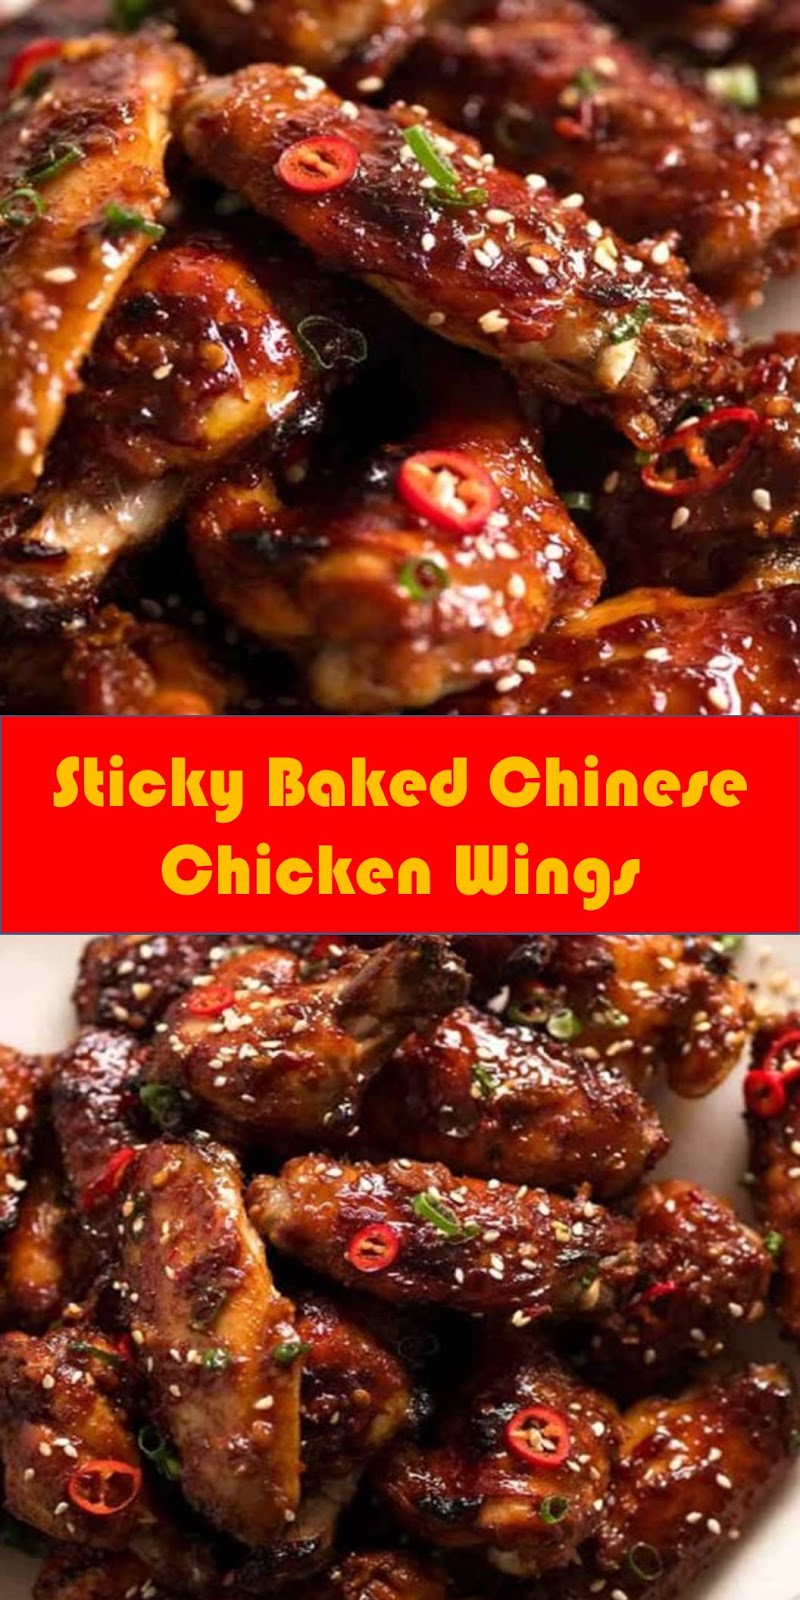 #Sticky #Baked #Chinese #Chicken #Wings